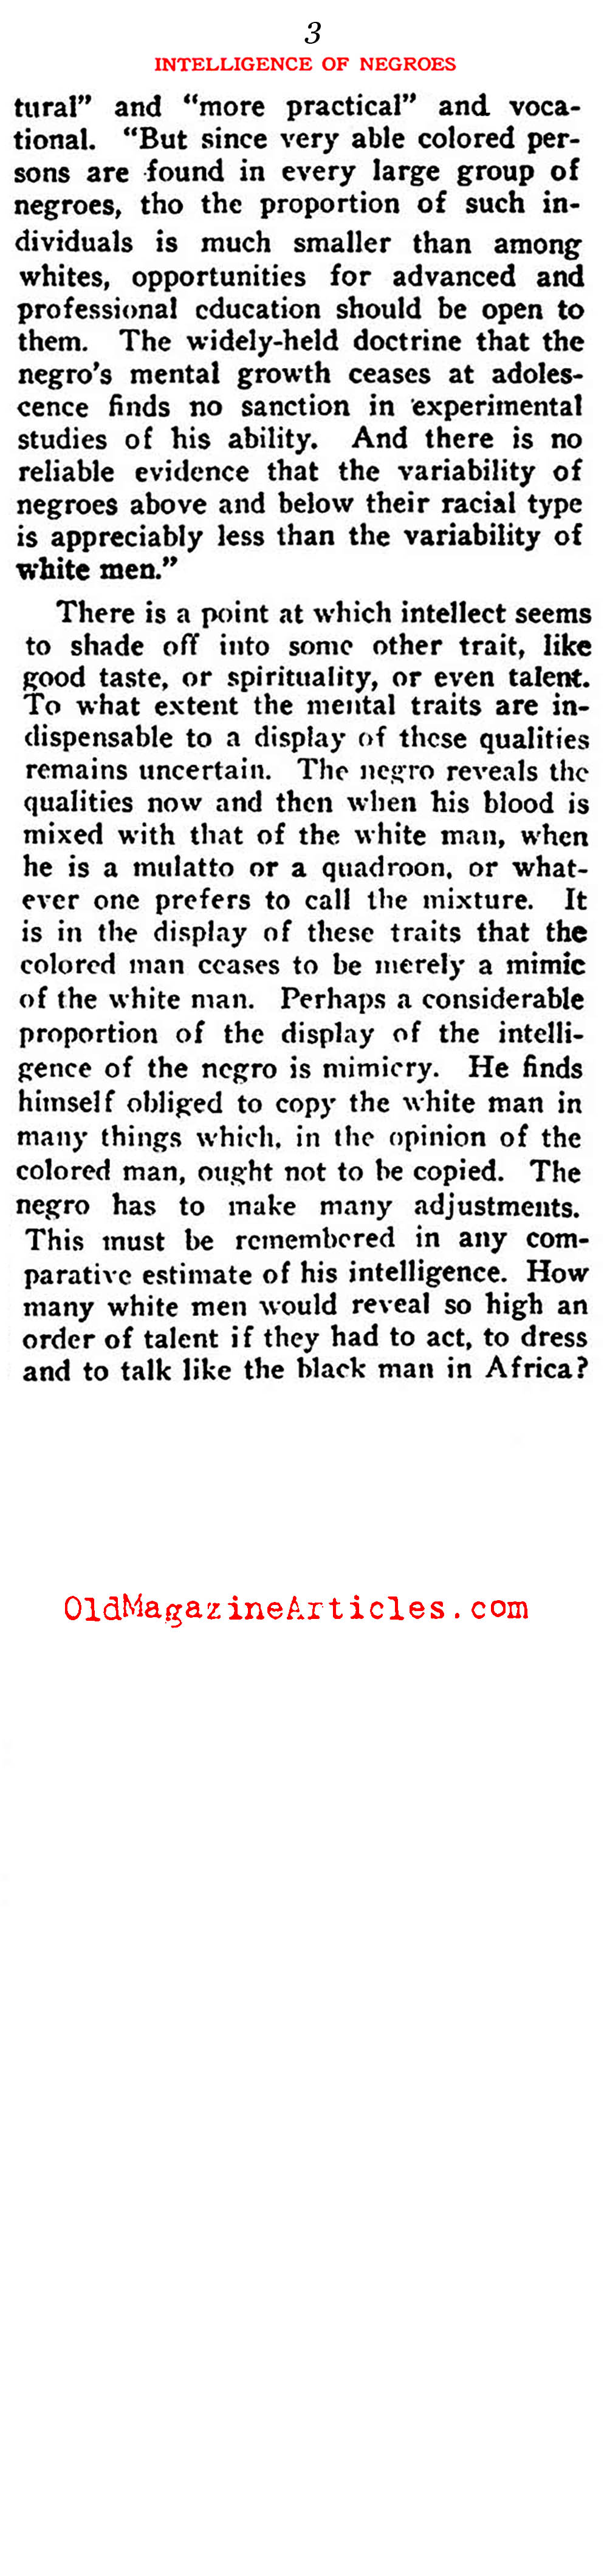 Bogus Science and the Intelligence of African-Americans (Current Opinion, 1921)